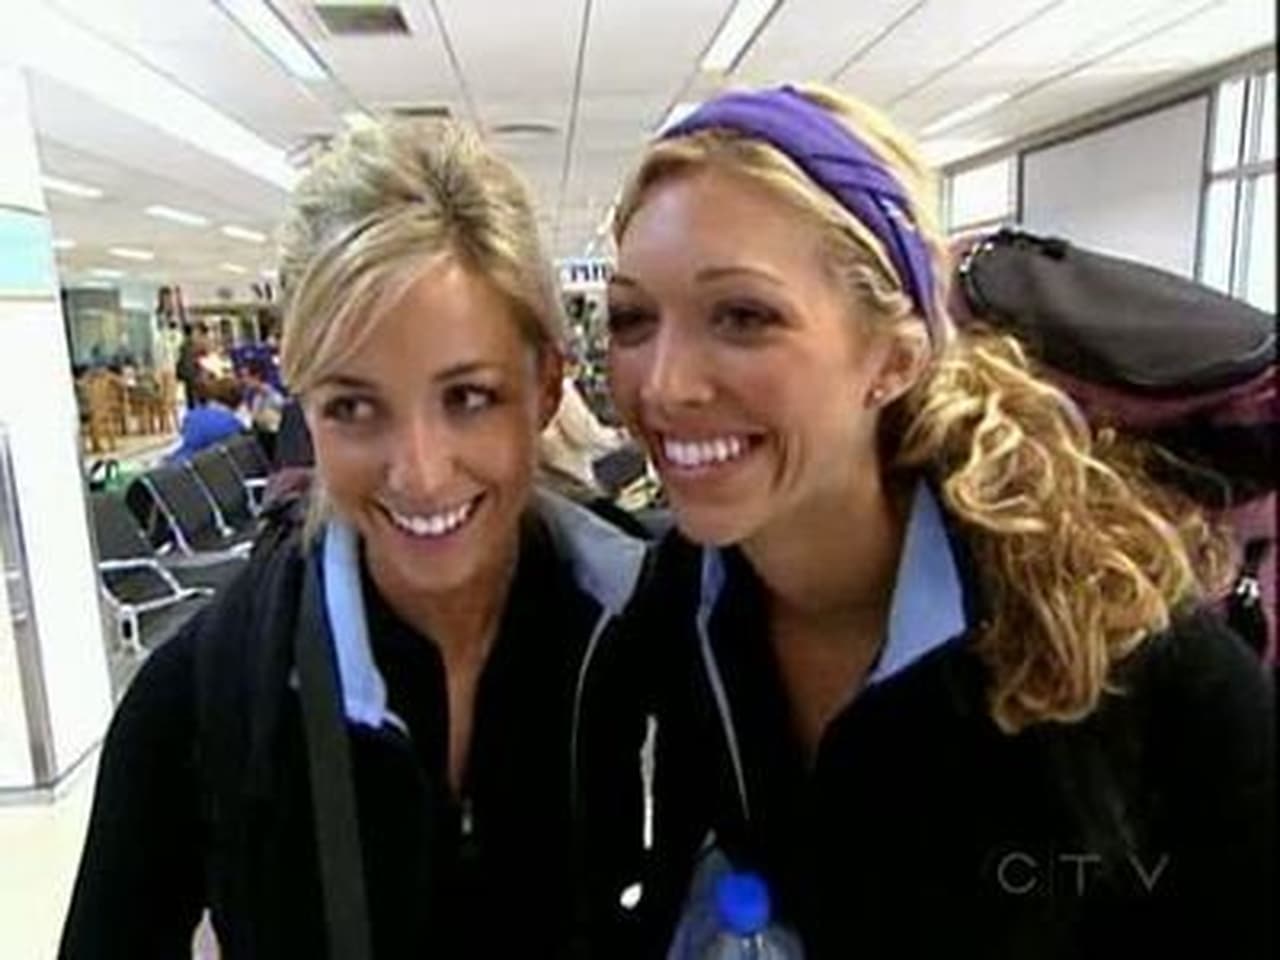 The Amazing Race - Season 10 Episode 3 : Oh Wow, It's like One of Those Things You See on TV!